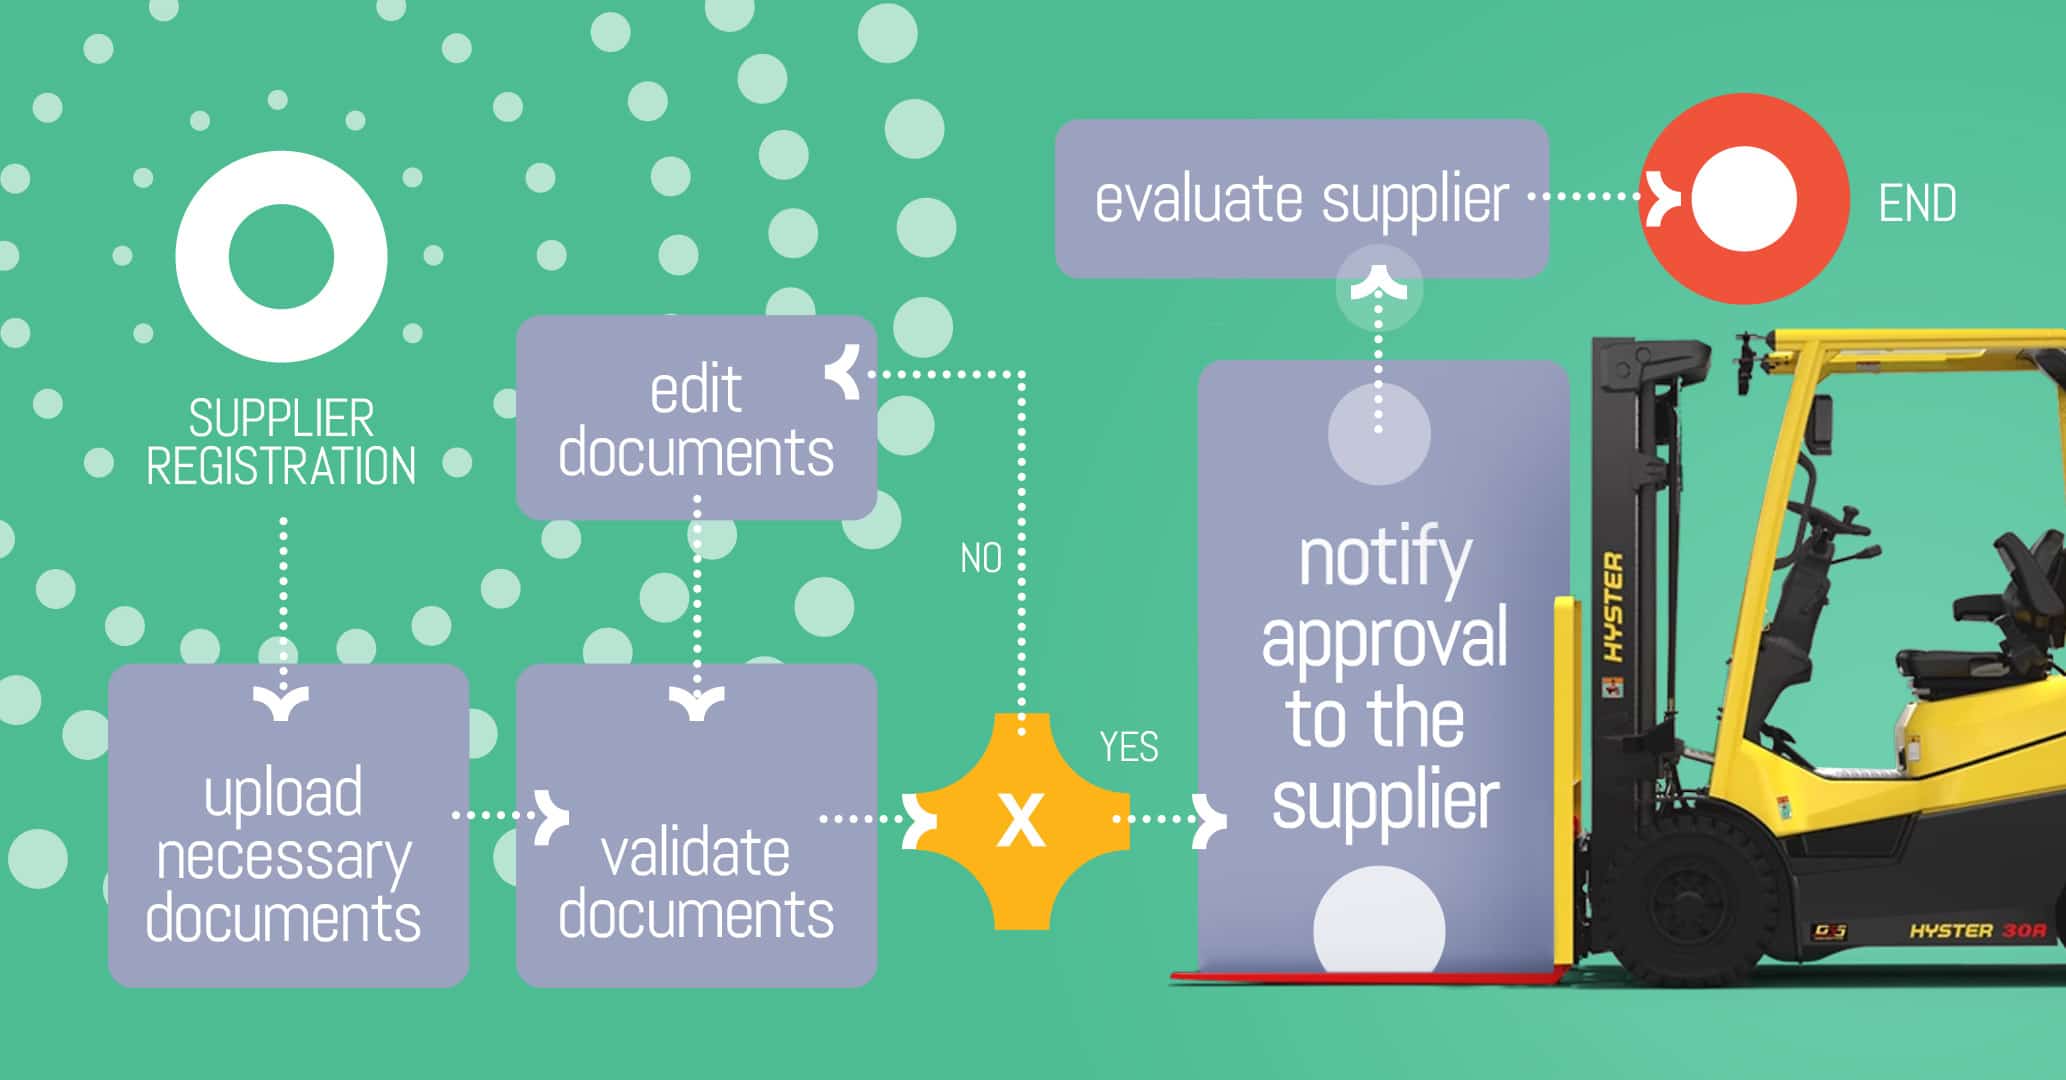 The key to optimal Supplier Management